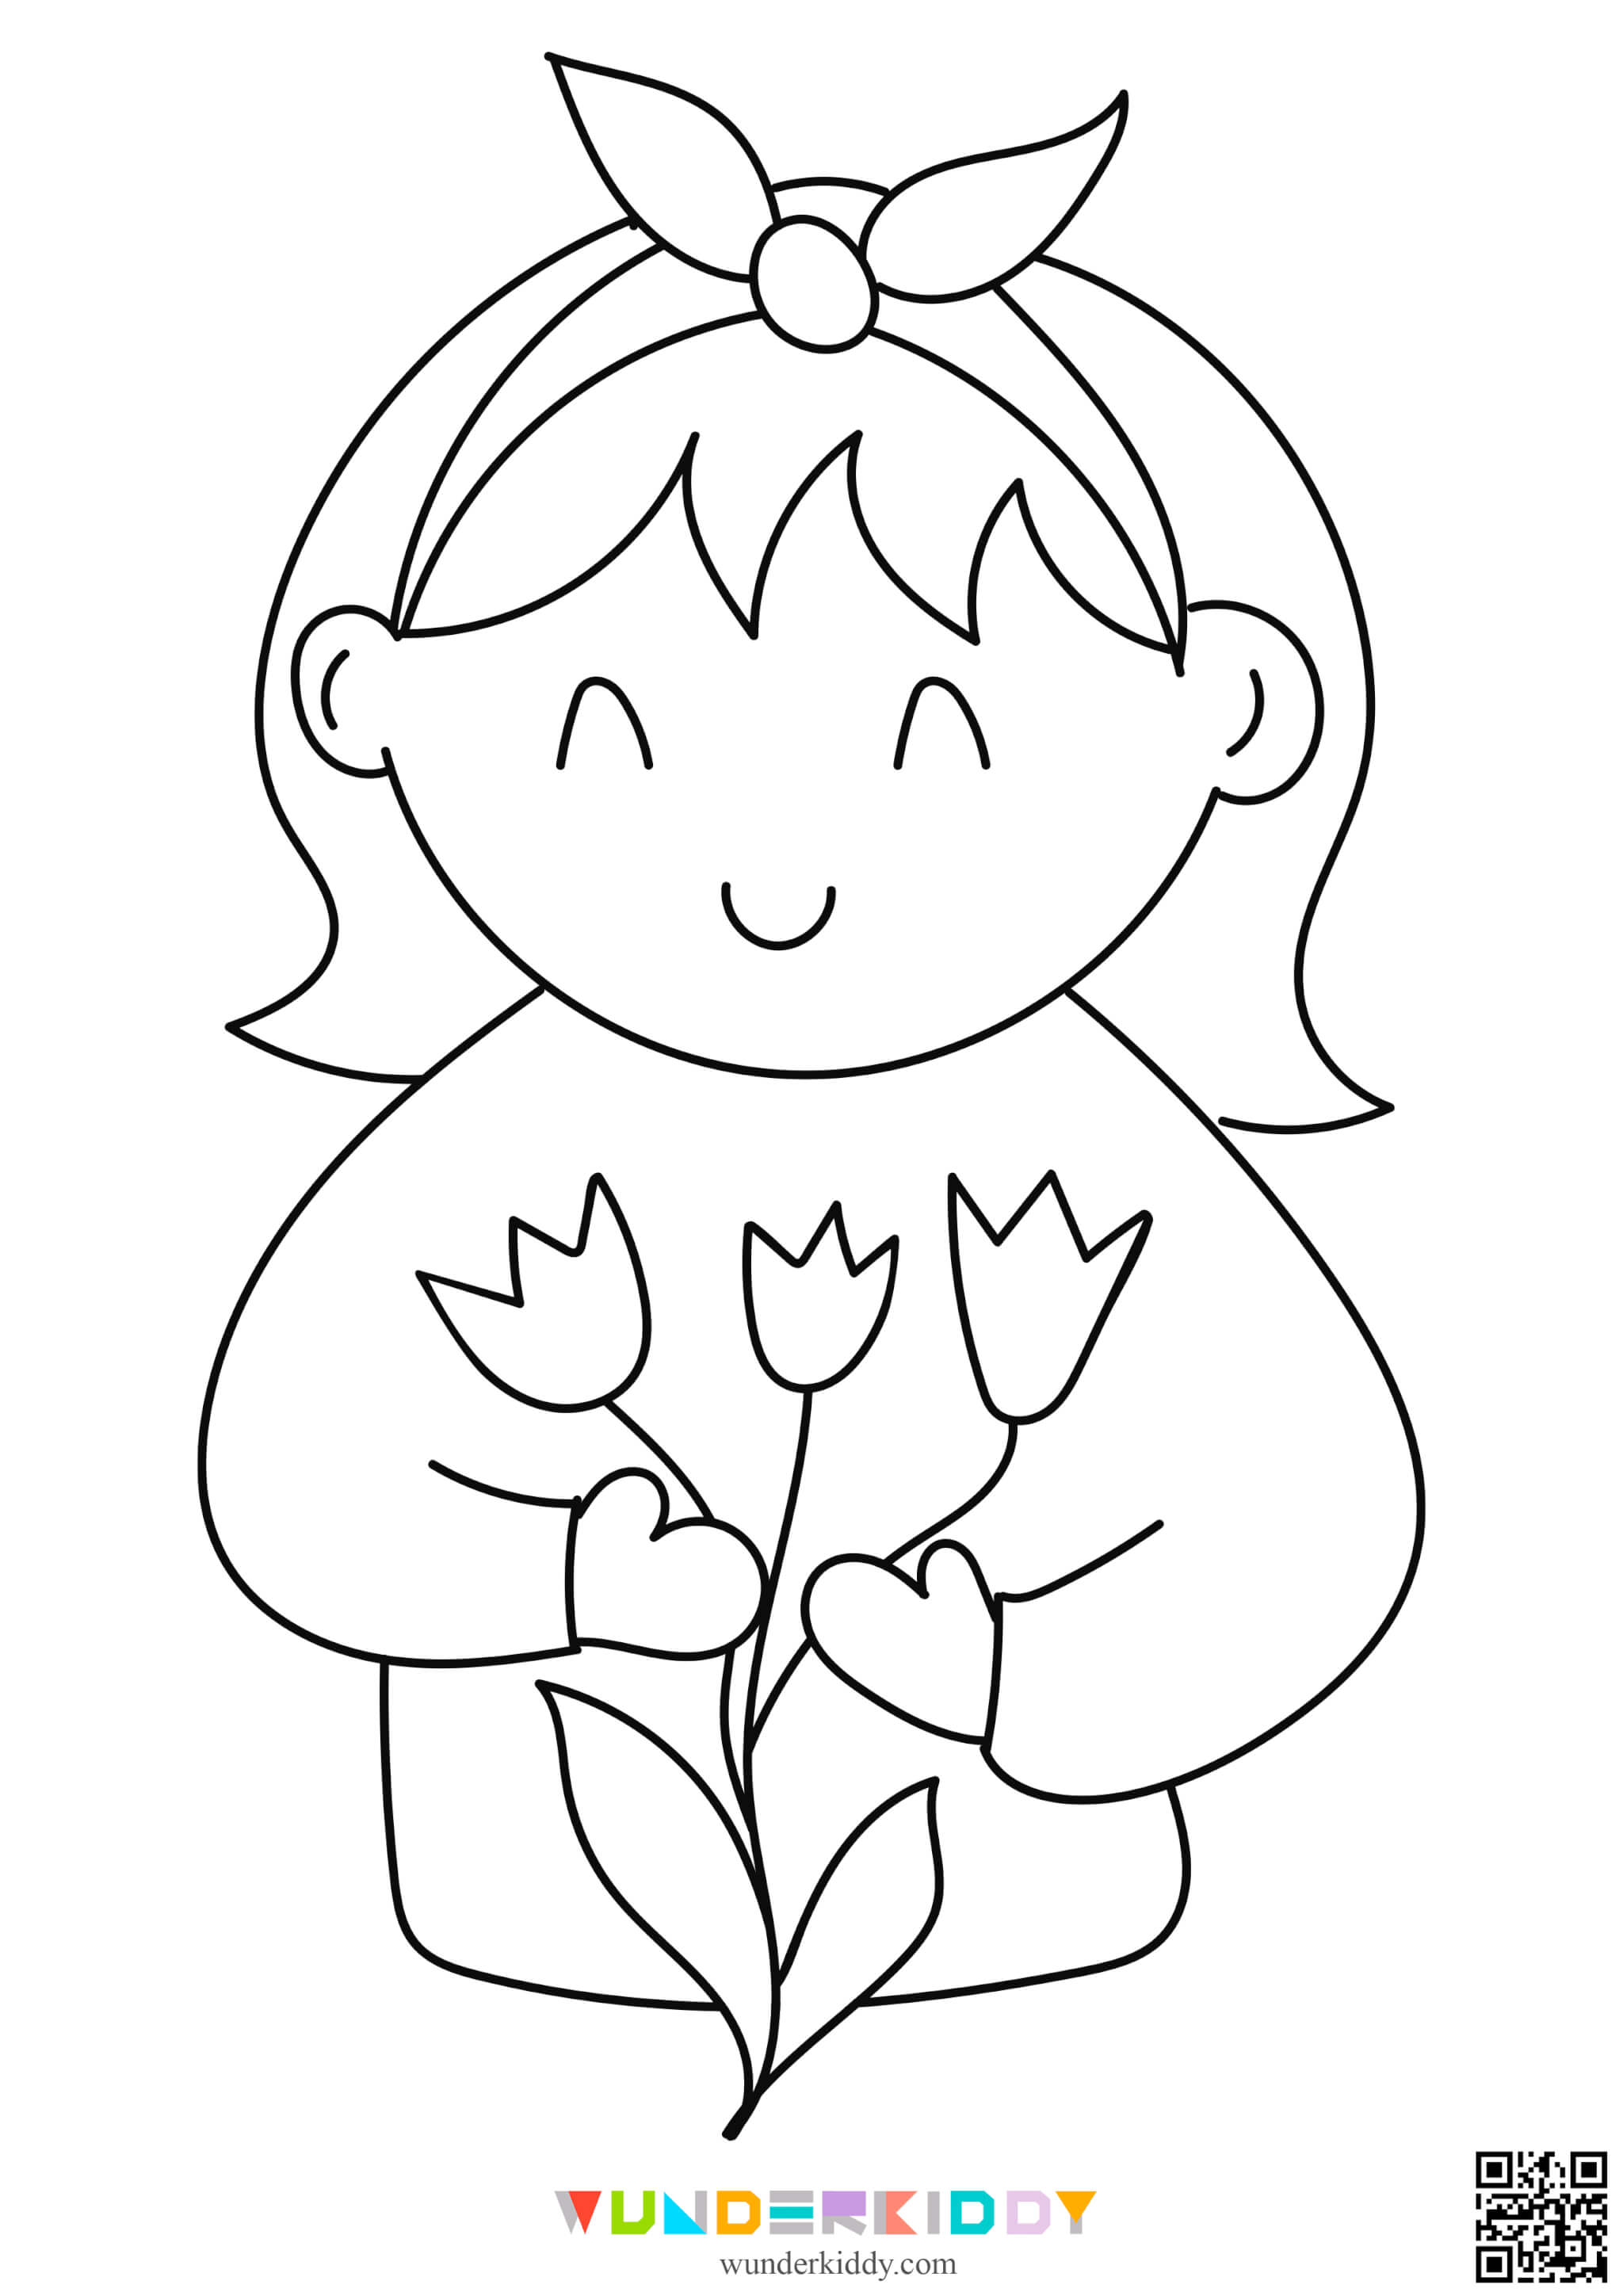 Spring Coloring Pages - Image 19